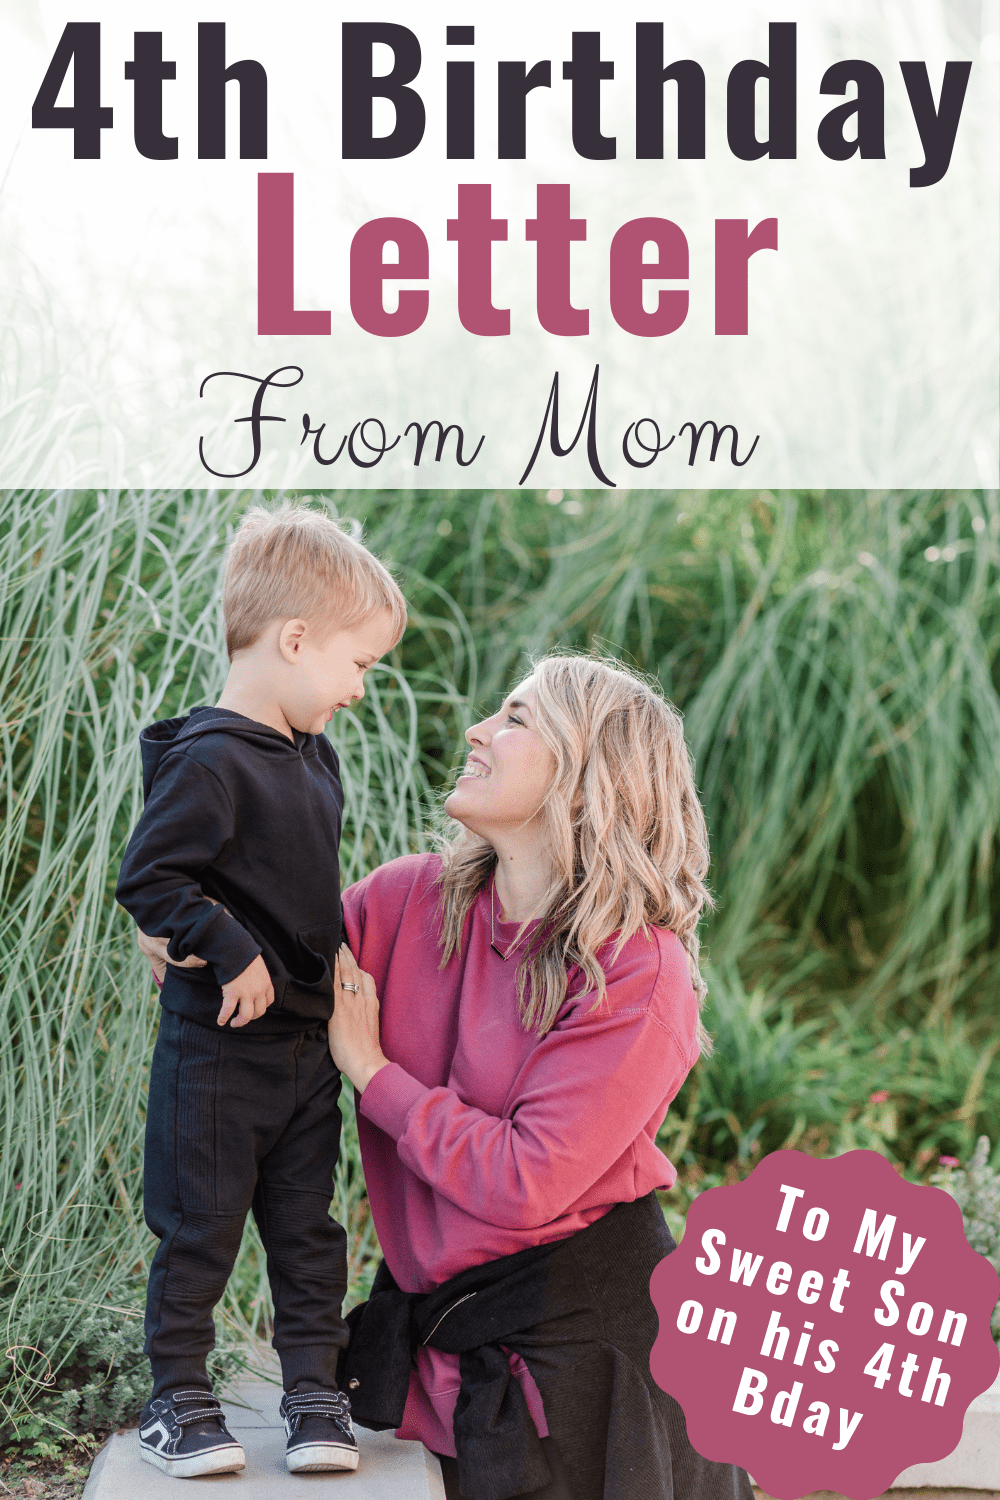 A Happy 4th birthday to my Son Letter - An example of a birthday letter to 4 year old son from mom. A yearly tradition to write birthday letters each year of the child's life! Here's my fourth birthday letter to my son on his special day from mom. 